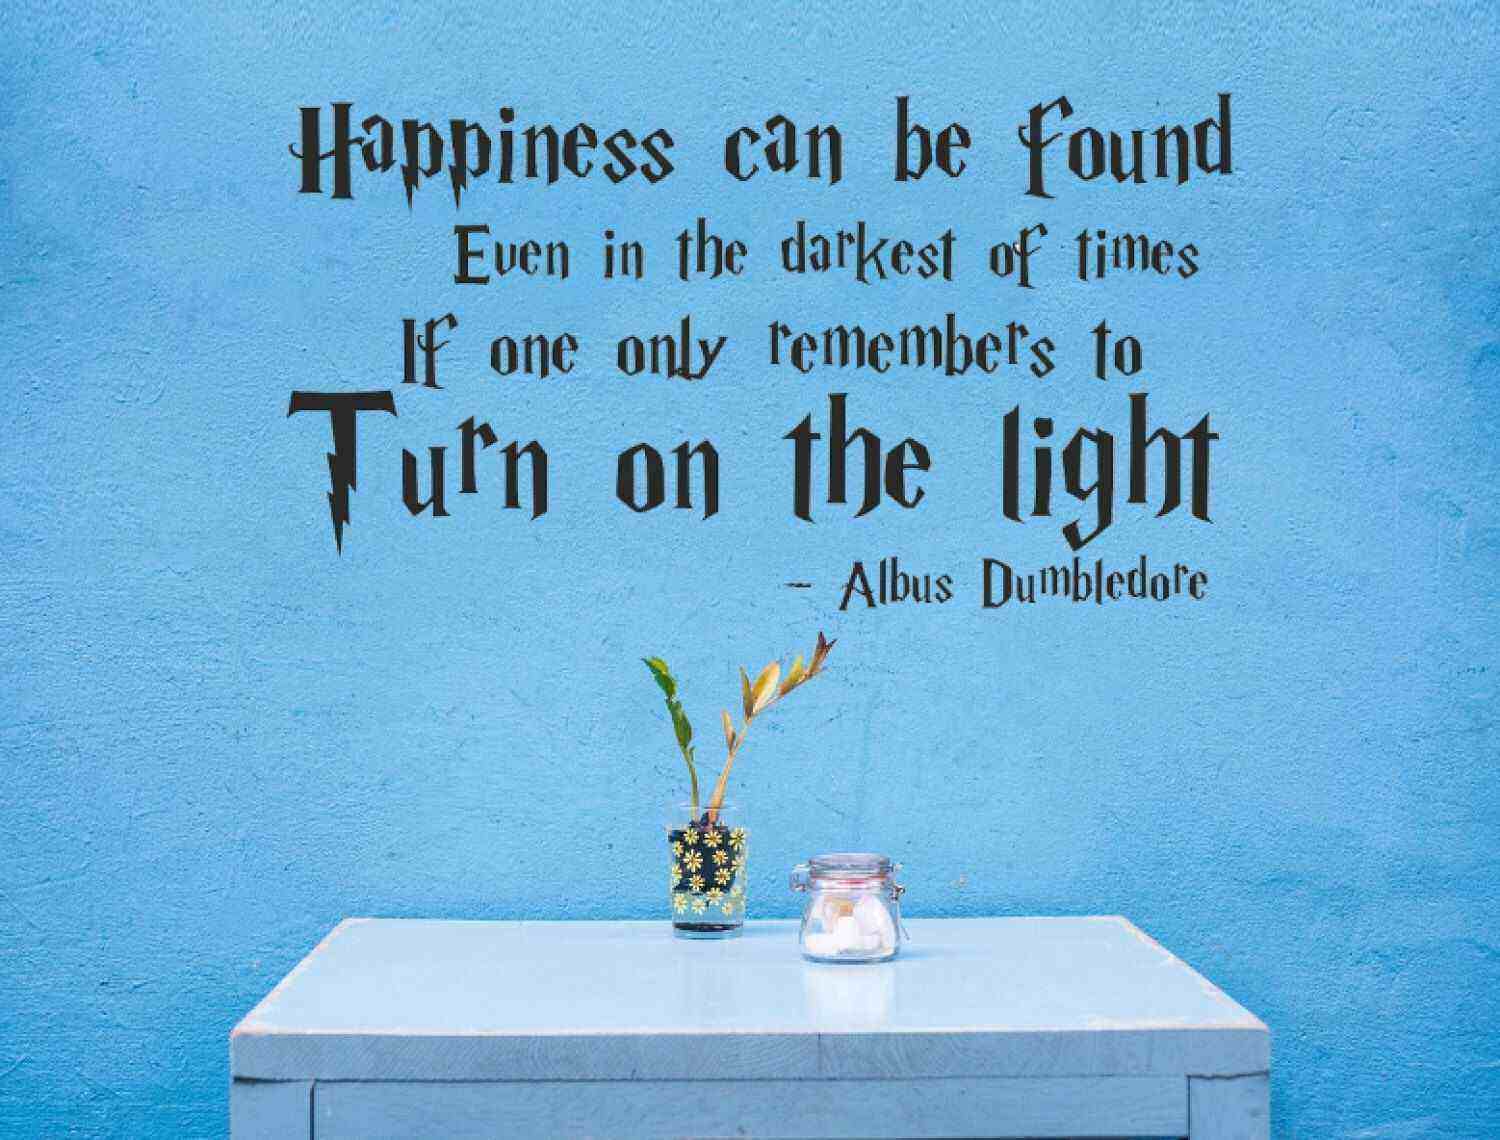 happiness quote from Harry Potter and the Prisoner of Azkaban by J.K.Rowling